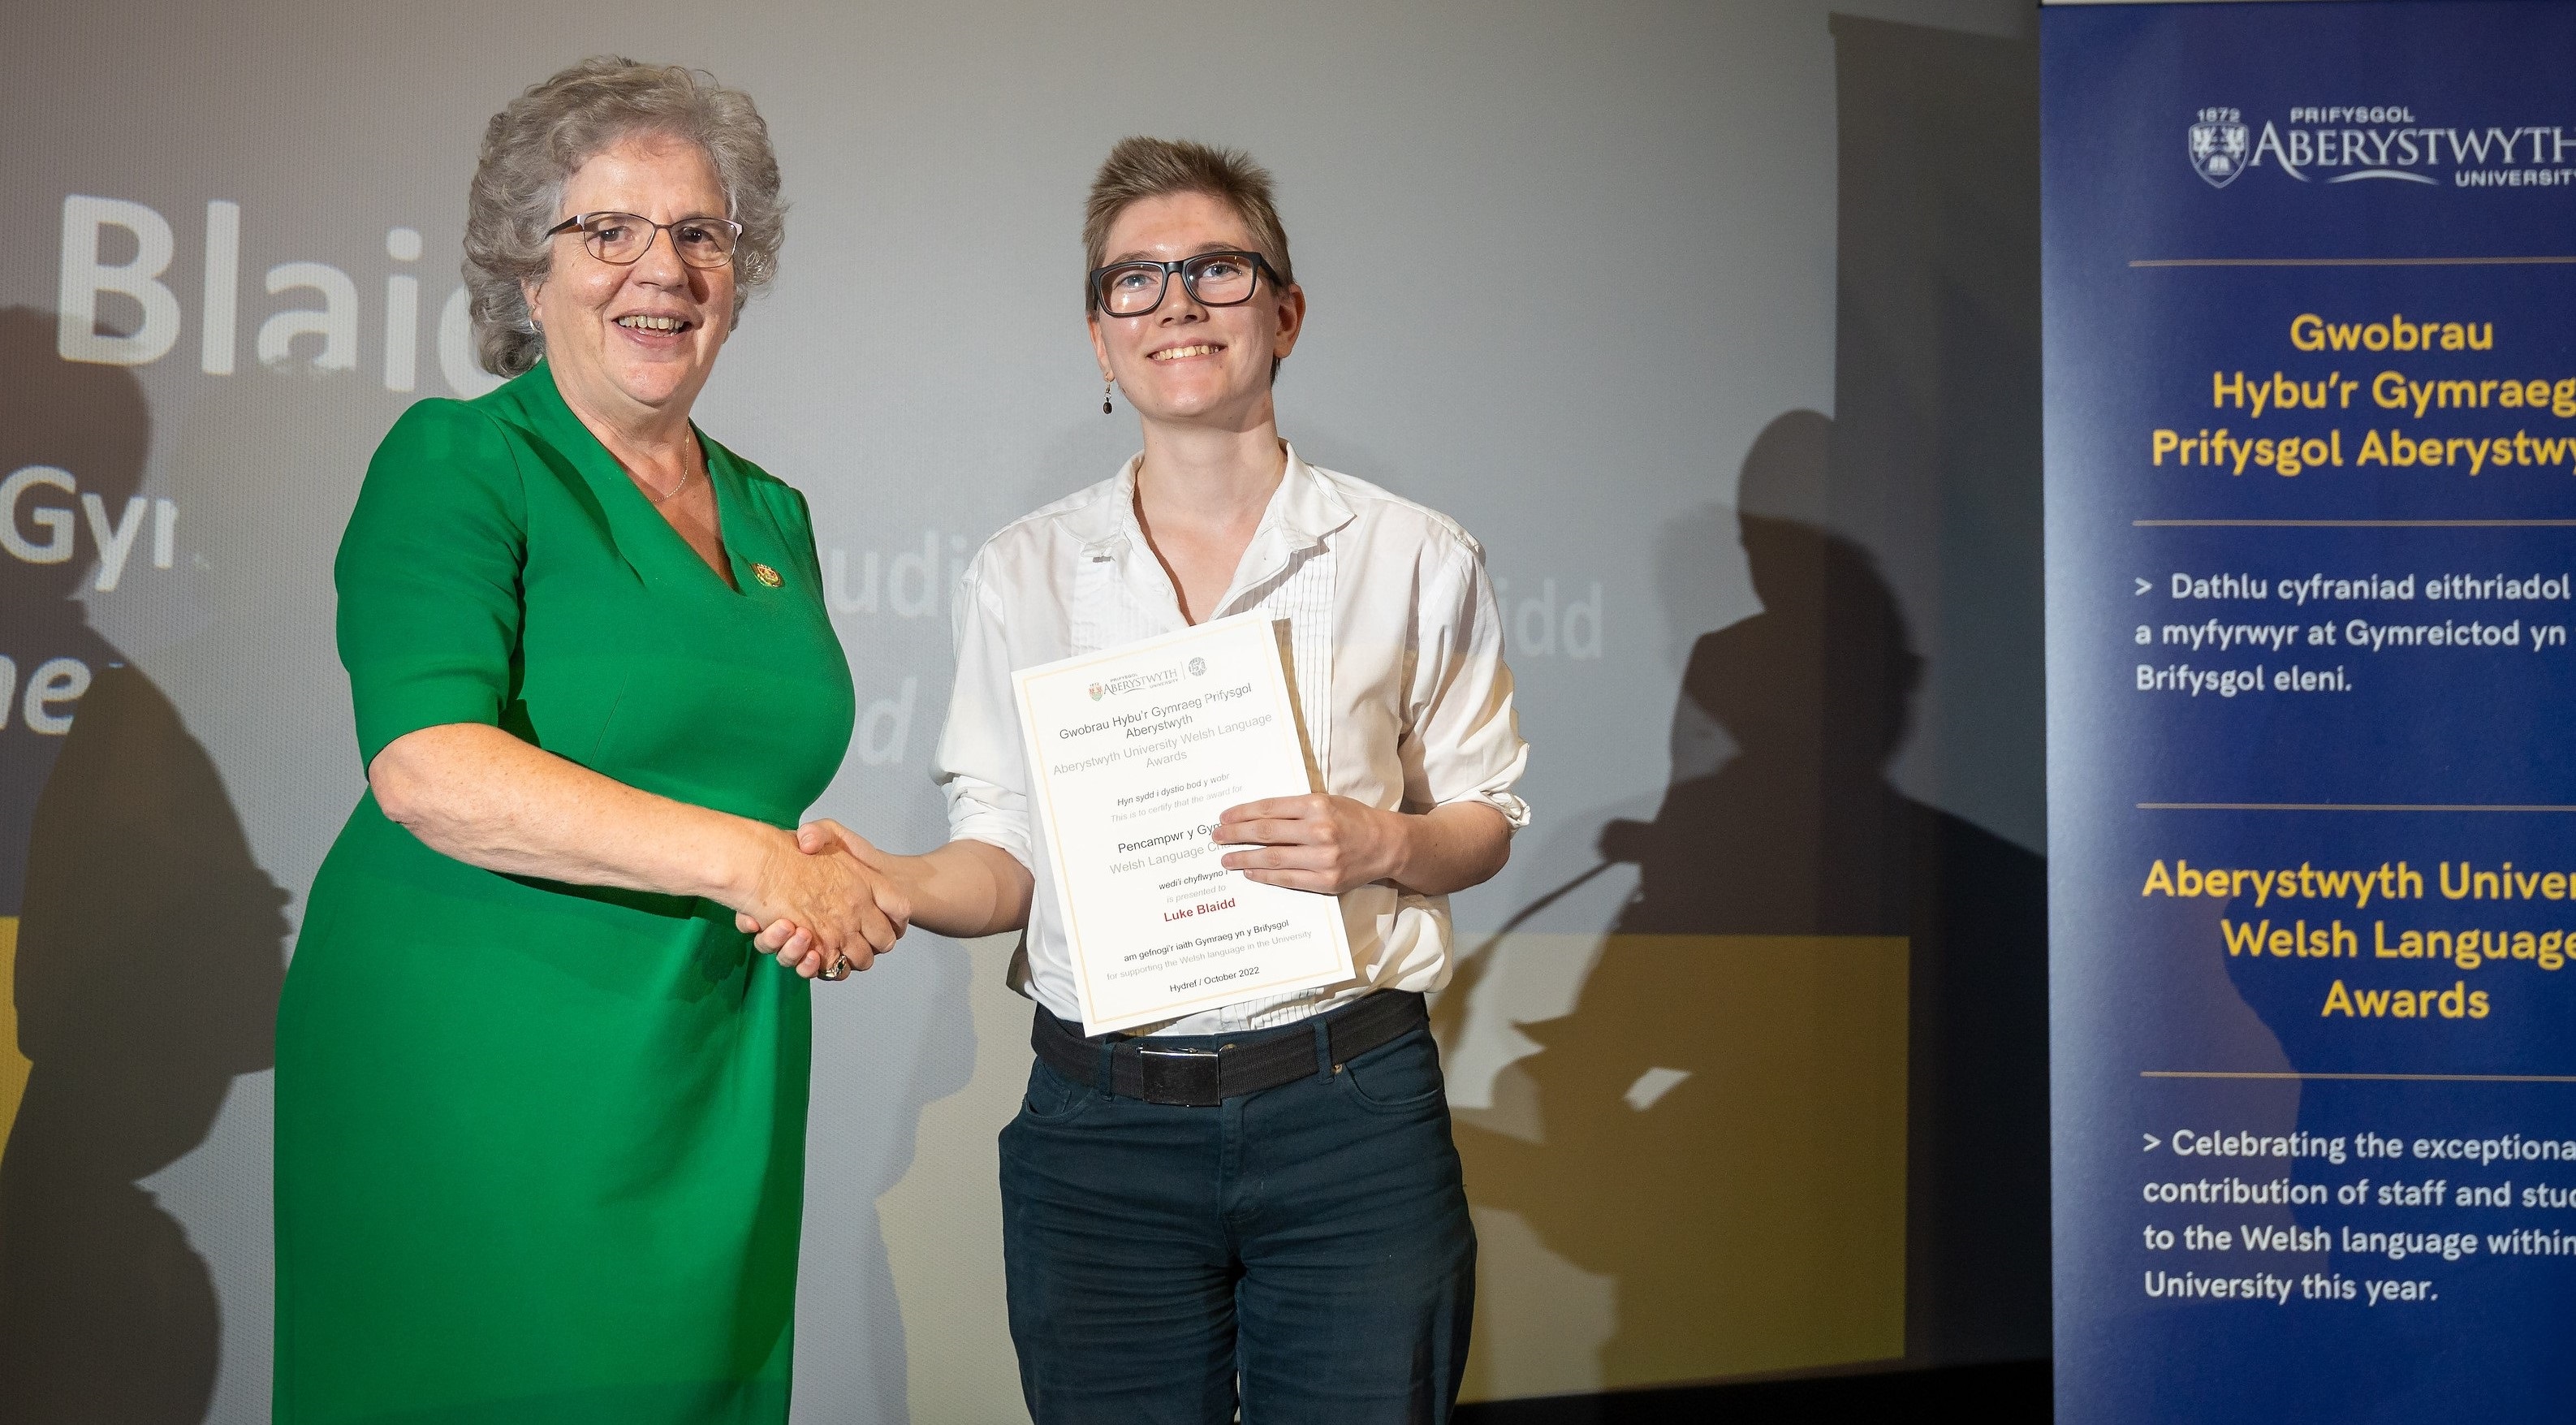 Undergraduate student Luke Blaidd receives the award for Welsh Language Champion from Professor Elizabeth Treasure, Vice-Chancellor Aberystwyth University. Born in Stockport and raised in north Manchester, Luke is the first member of his family to speak Welsh.